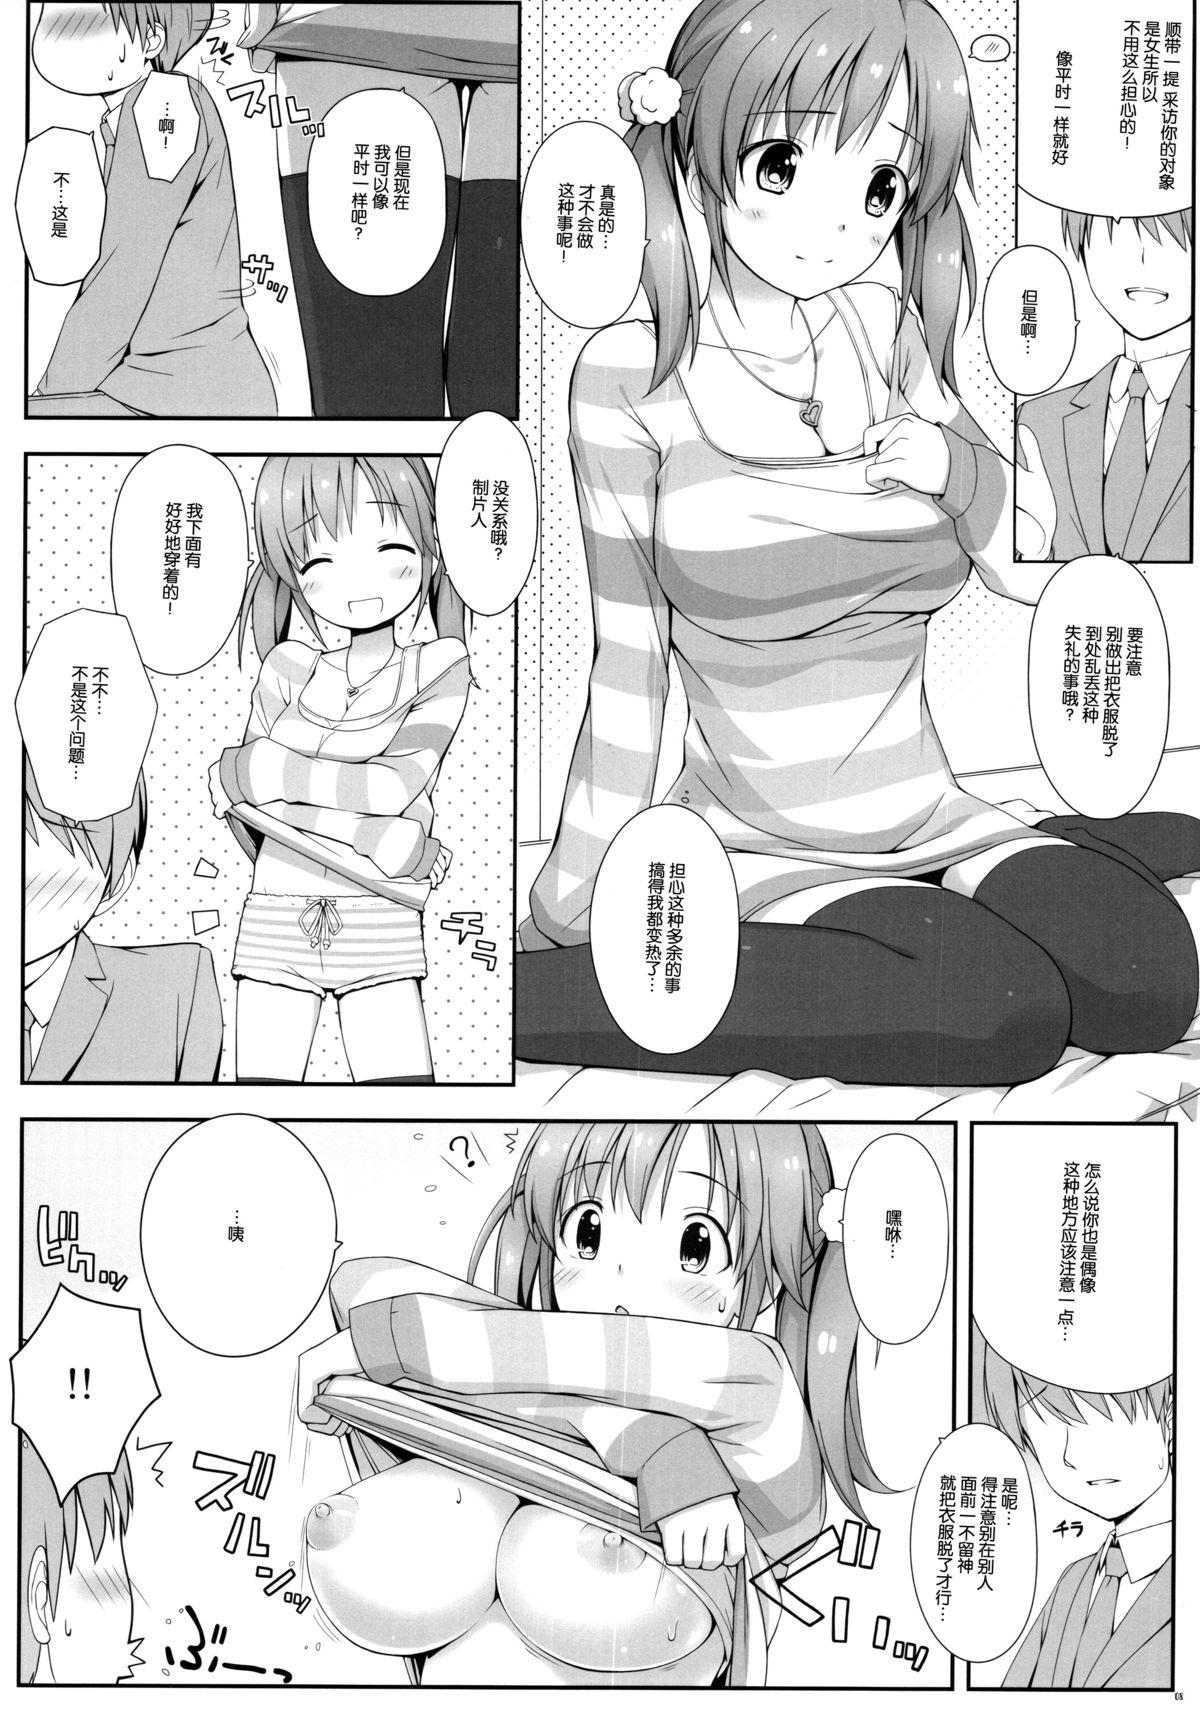 Pegging BAD COMMUNICATION? 15 - The idolmaster Canadian - Page 9